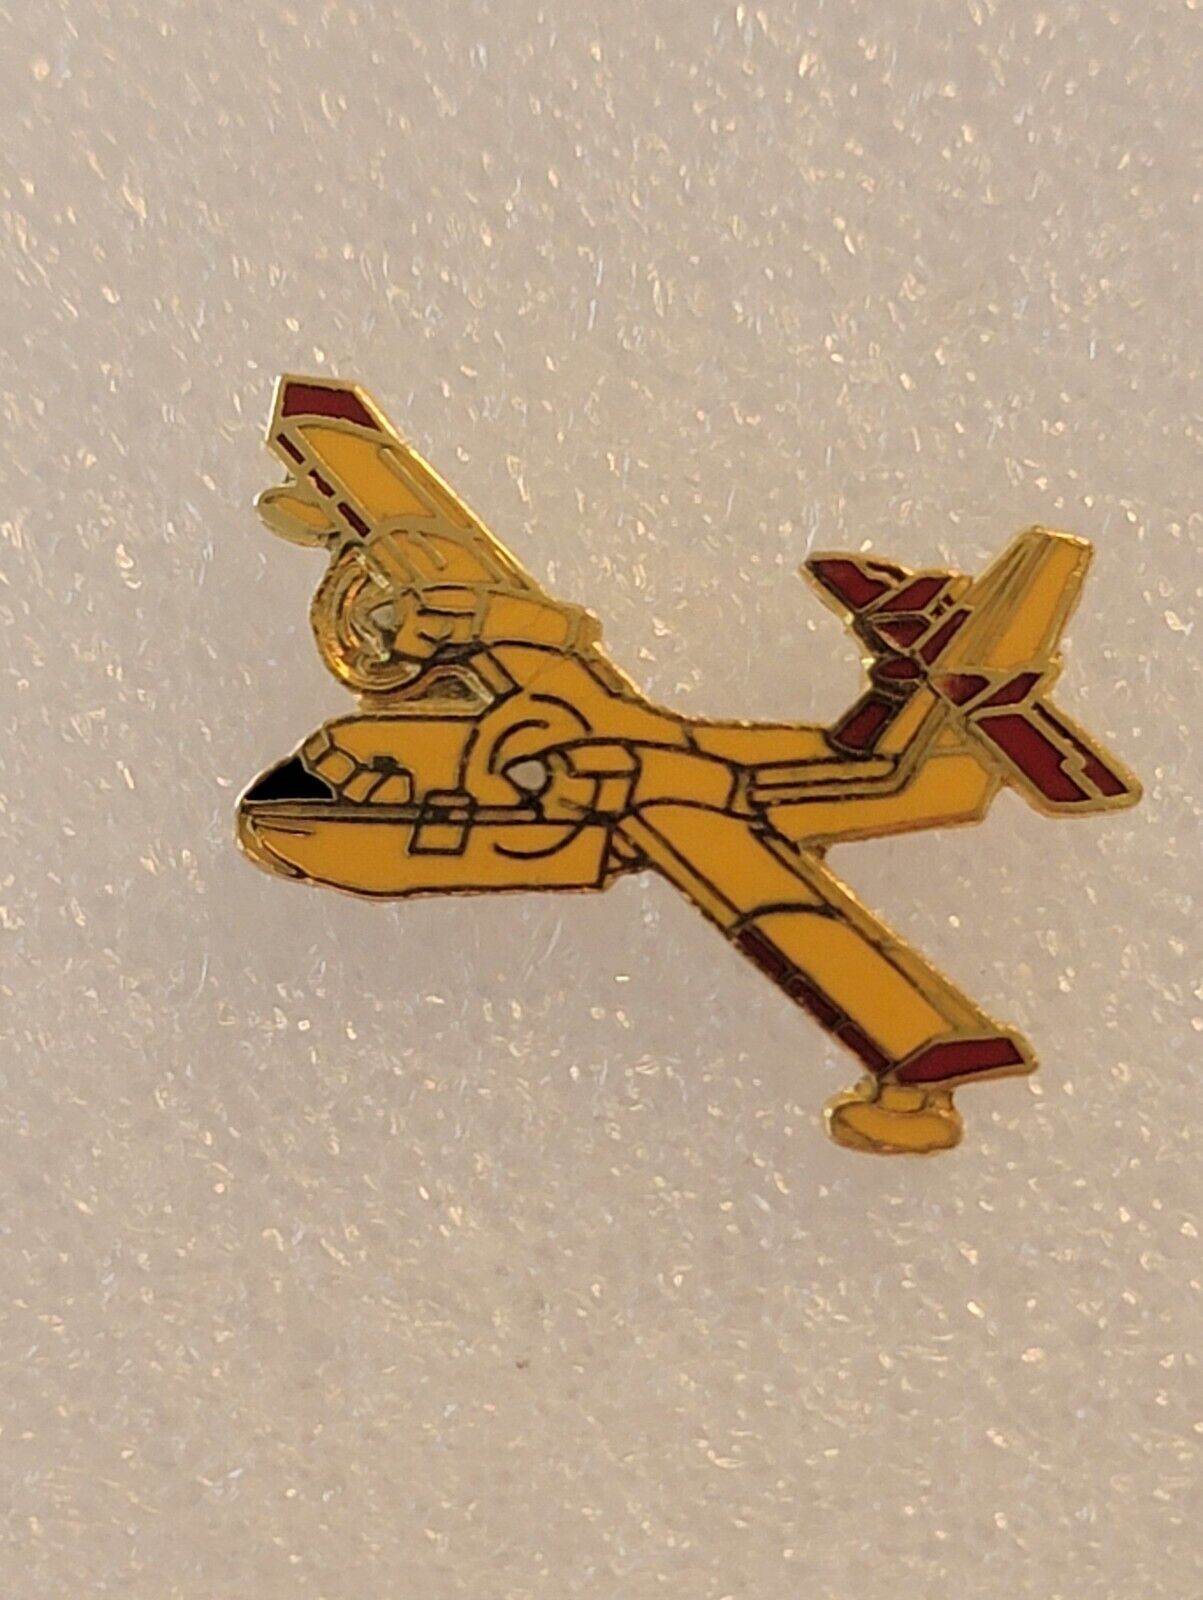 Water Bomber CL-415 Avion Bombardier D\'eau Superscoopers Aerial Firefighter Pin